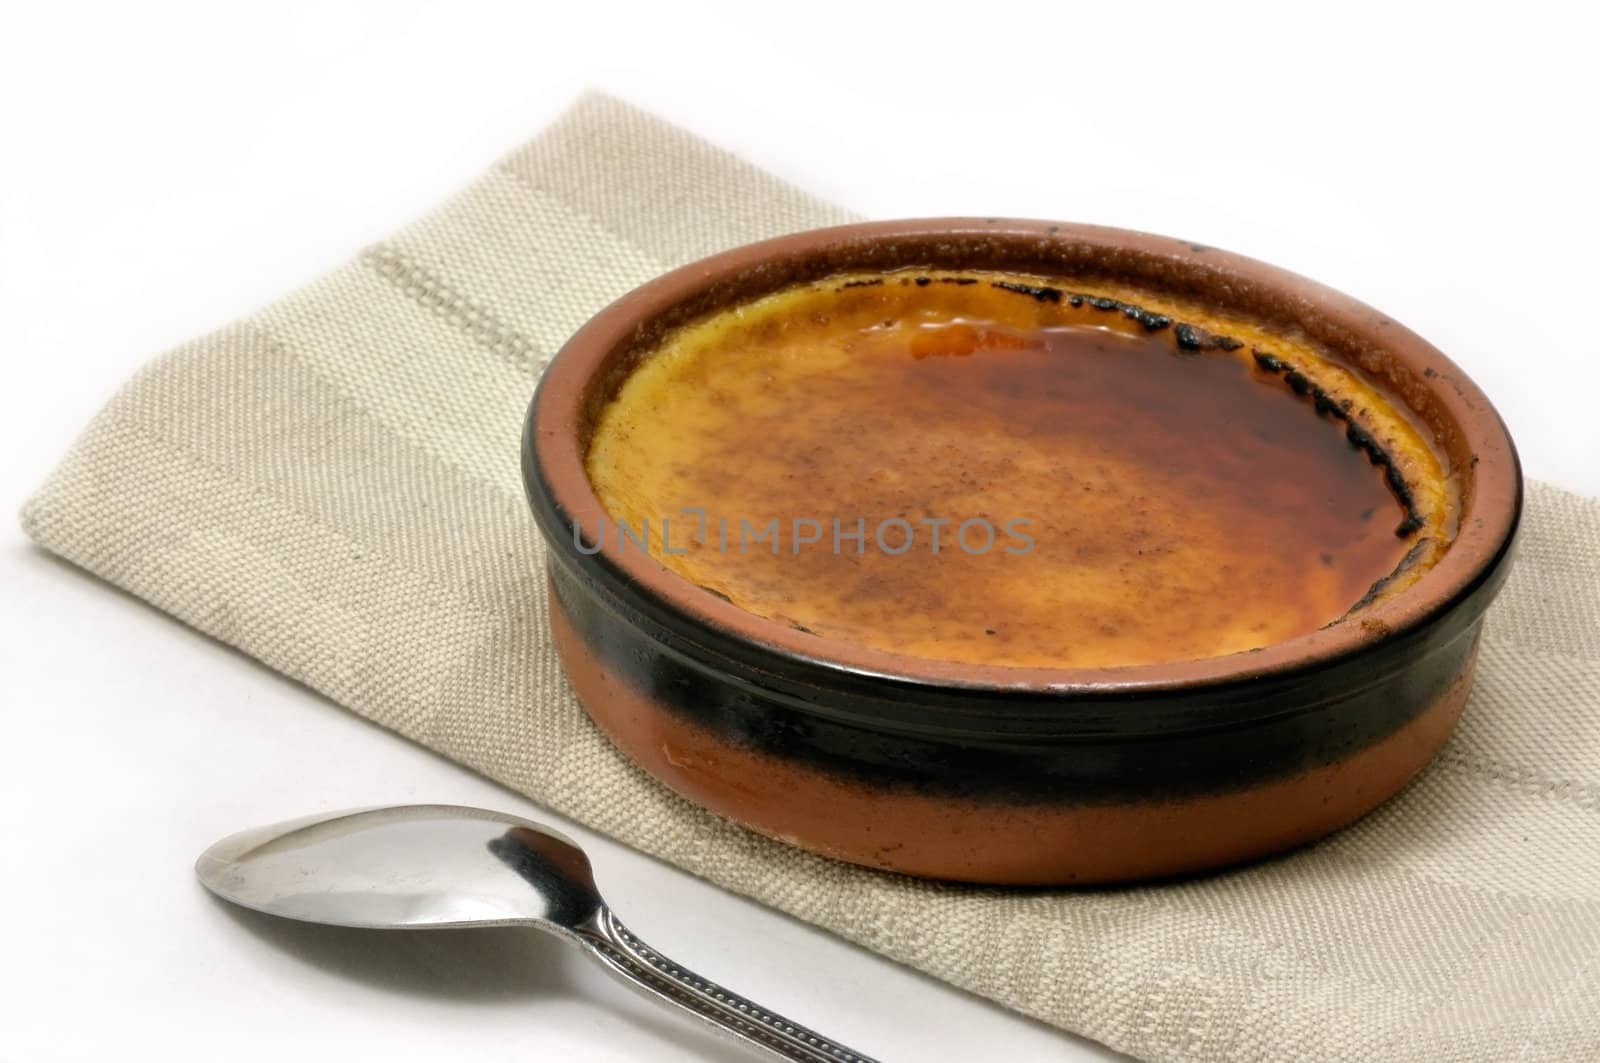 French creme brulee served in an earthenware dish on a napkin